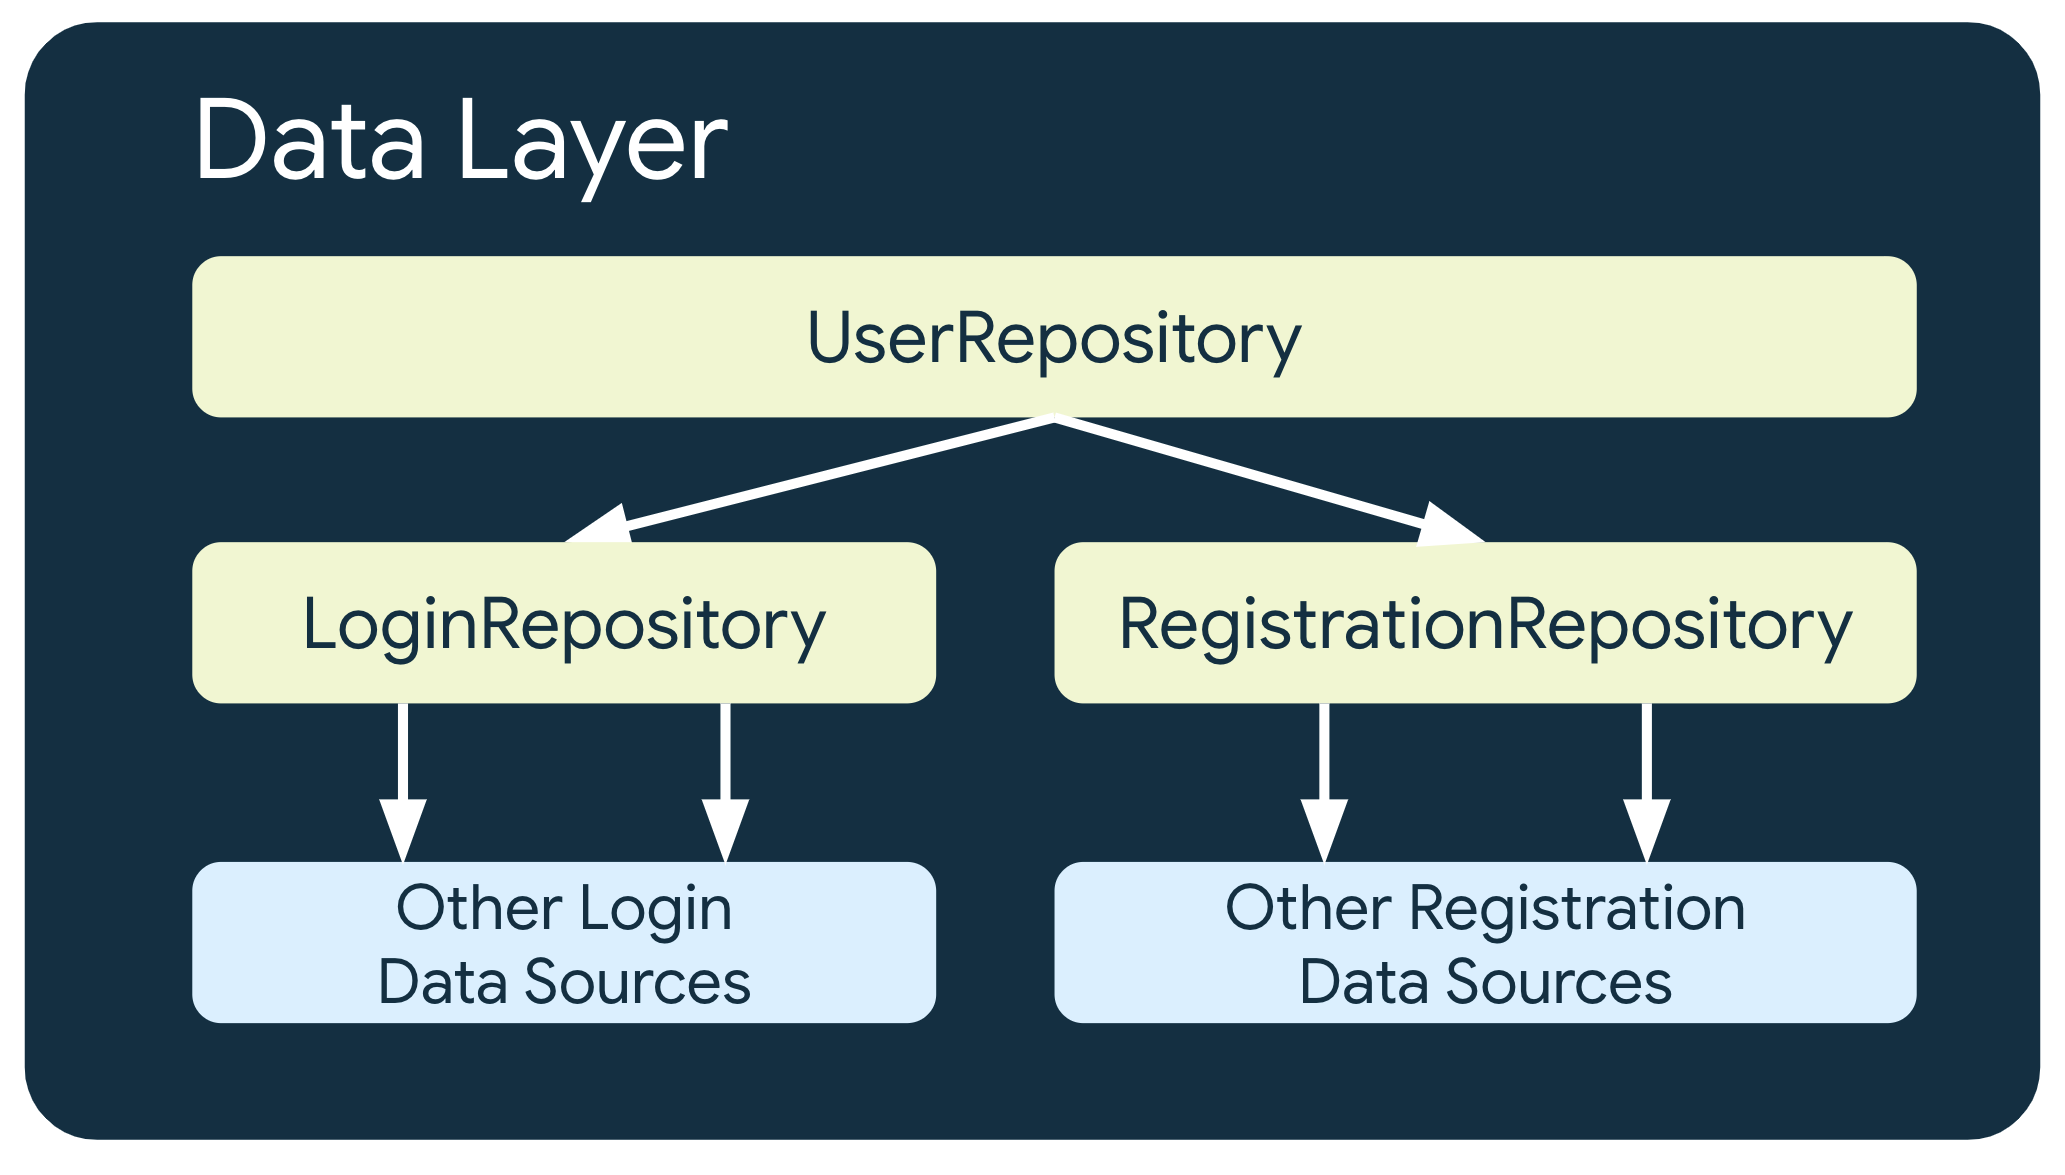 In the example, UserRepository depends on two other repository classes:
    LoginRepository, which depends on other login data sources; and
    RegistrationRepository, which depends on other registration data sources.